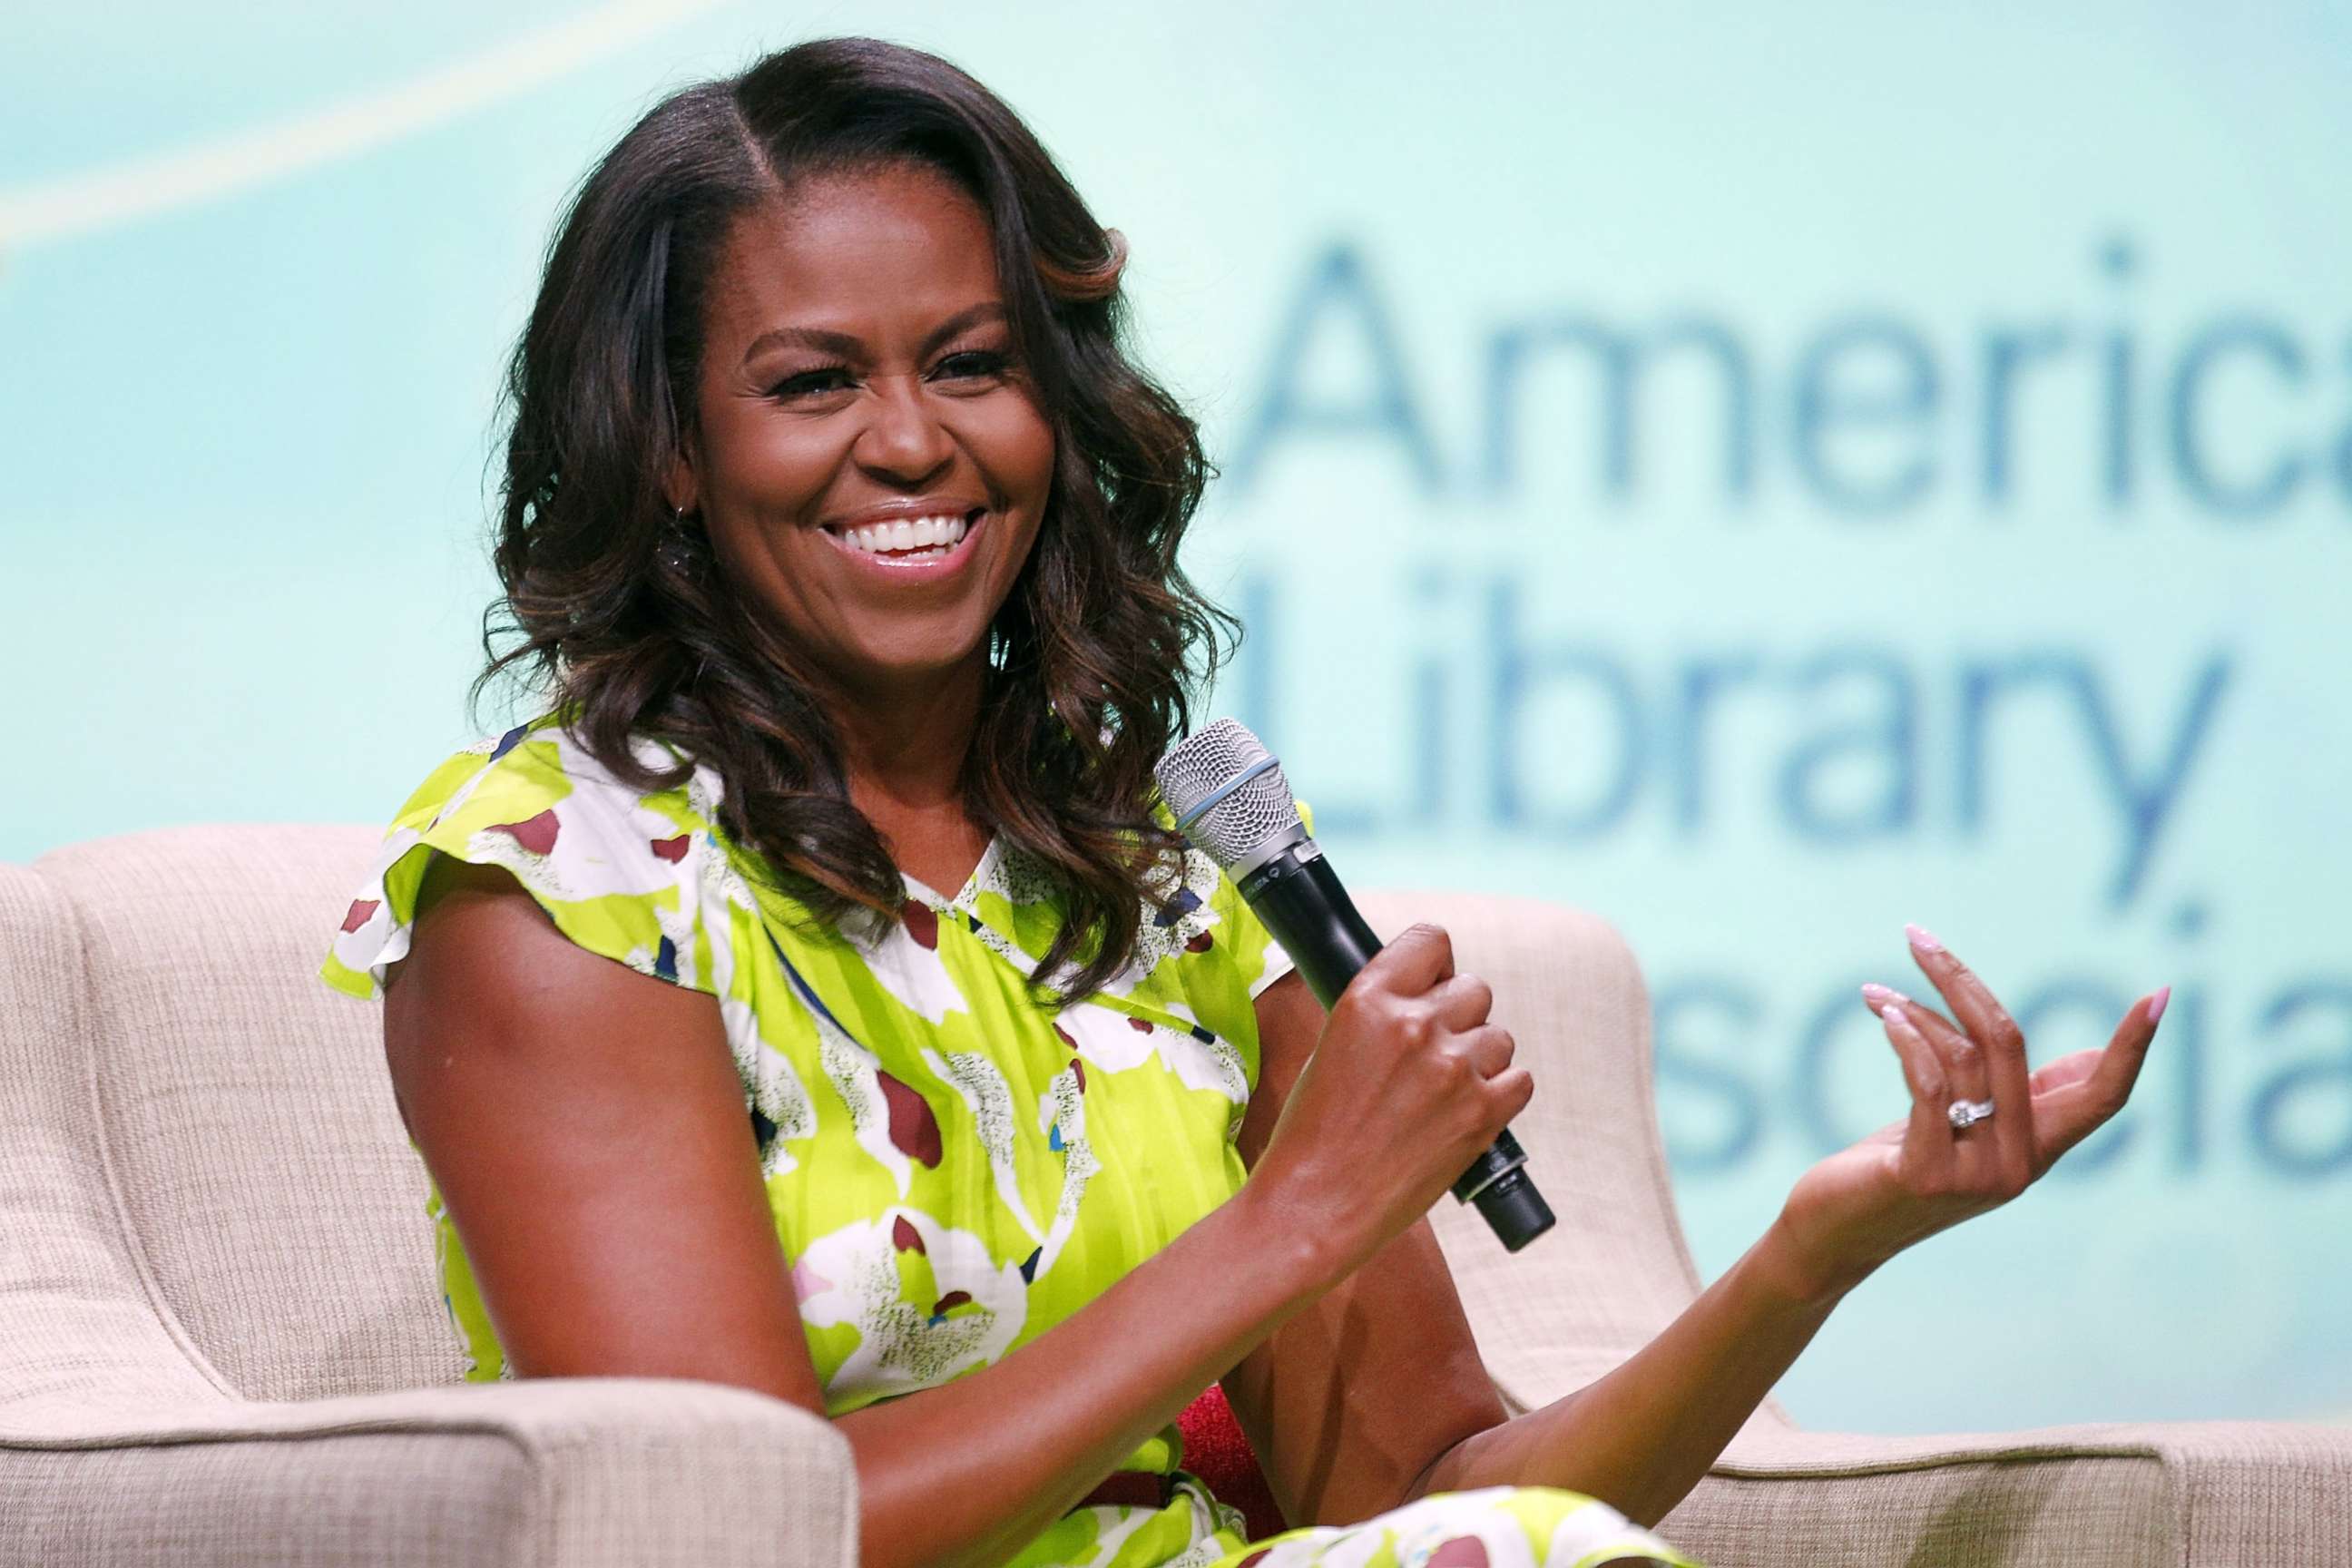 PHOTO: Former first lady Michelle Obama discusses her forthcoming memoir titled, "Becoming", during the 2018 American Library Association Annual Conference on June 22, 2018 in New Orleans.